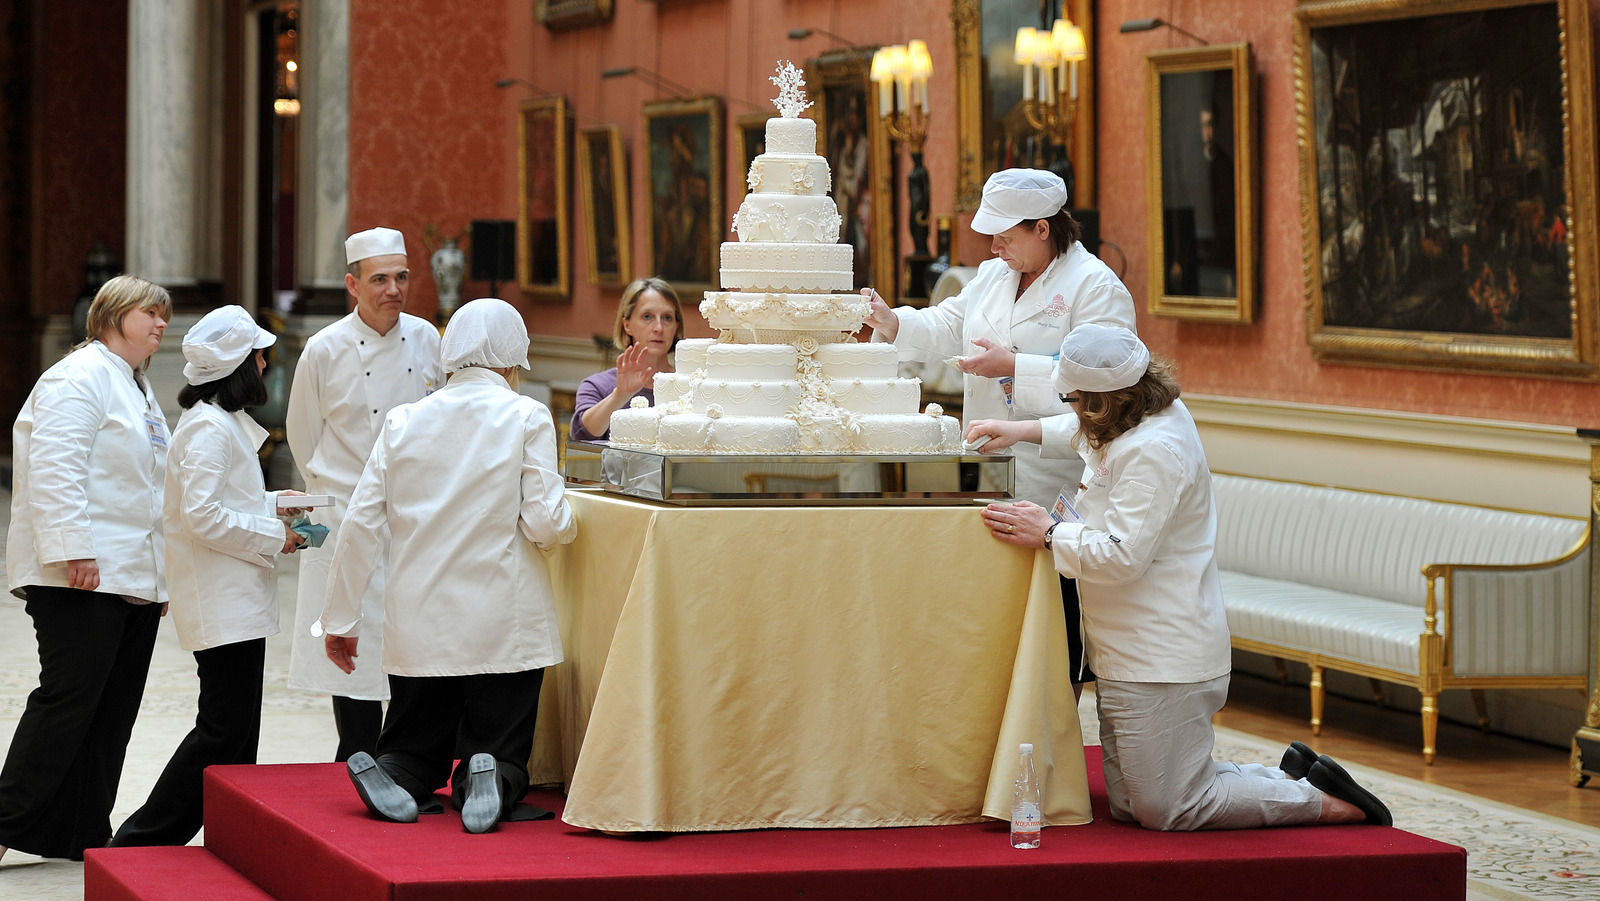 The Most Expensive Slice Of Royal Wedding Cake Auctioned Off